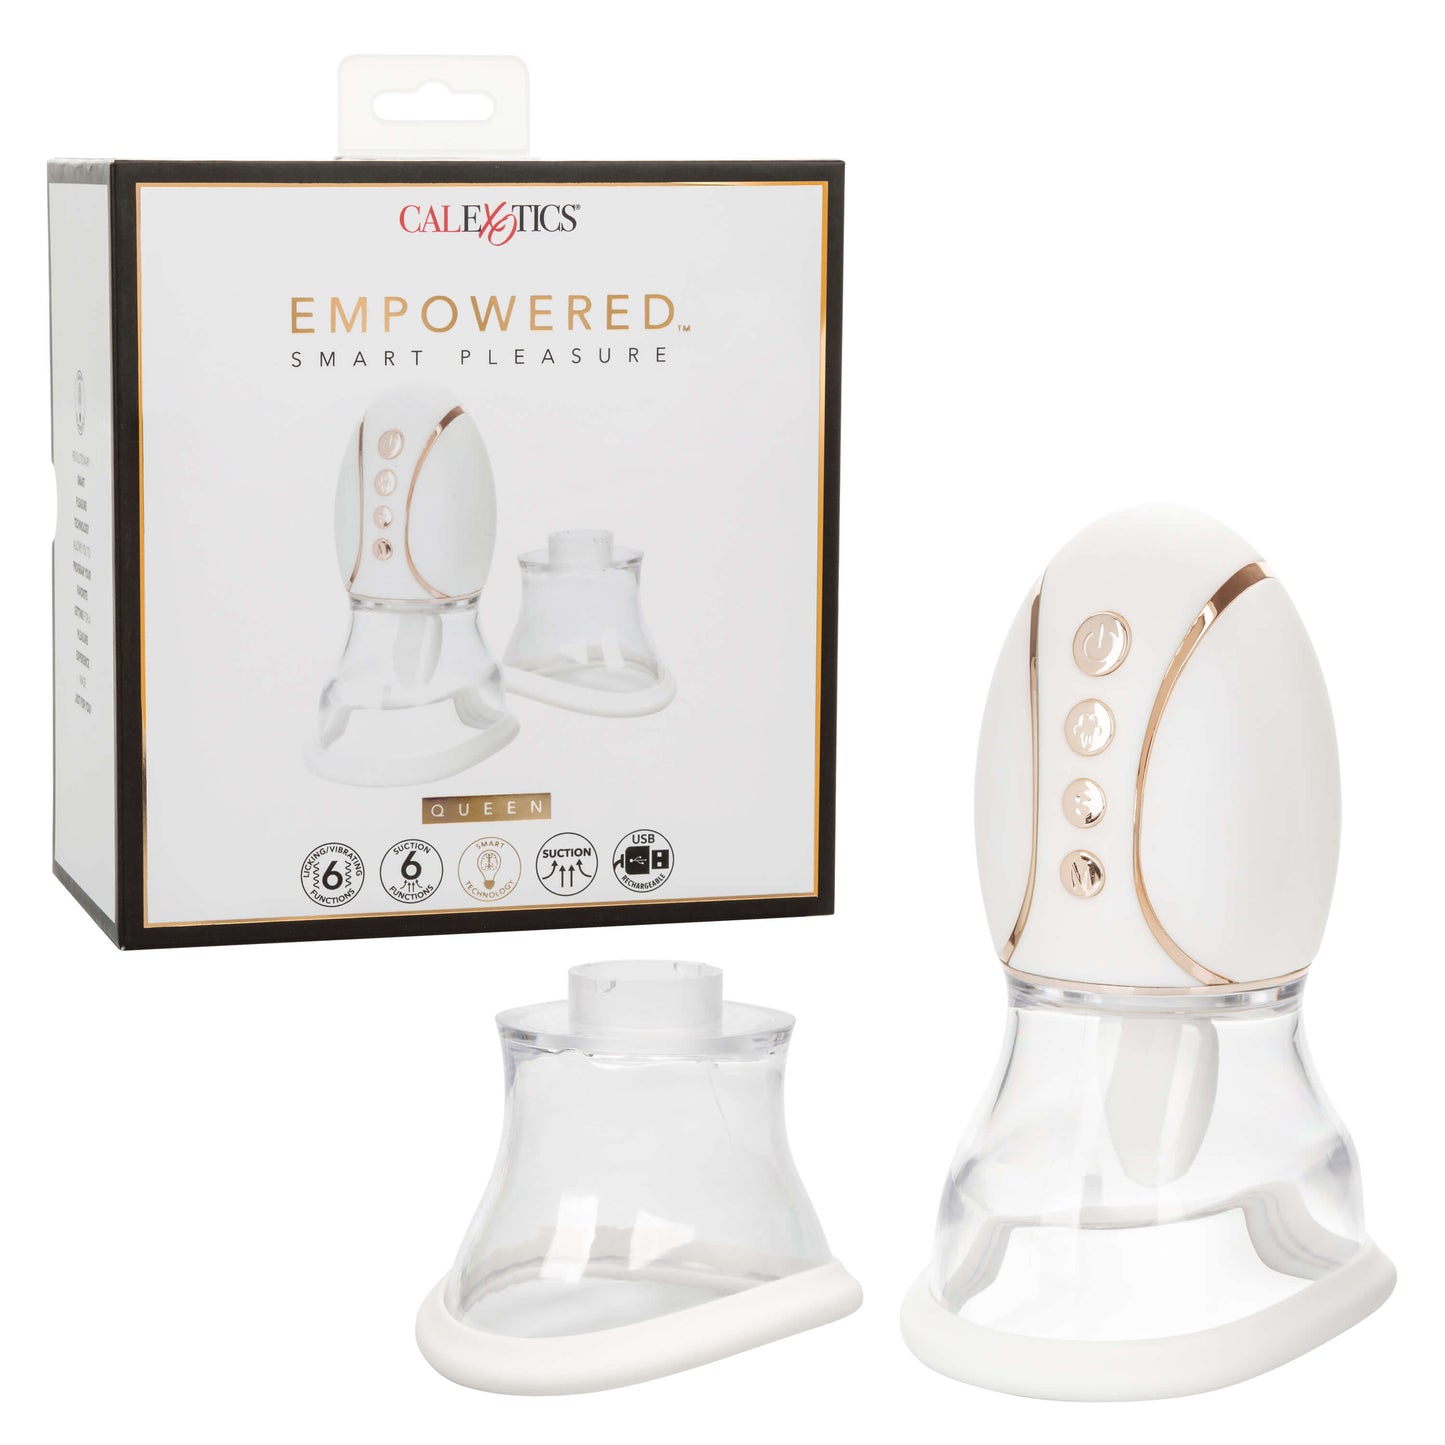 Package of the Empowered Smart Pleasure Queen - CalExotics - The Bigger O online sex toy shop USA, Canada & UK shipping available